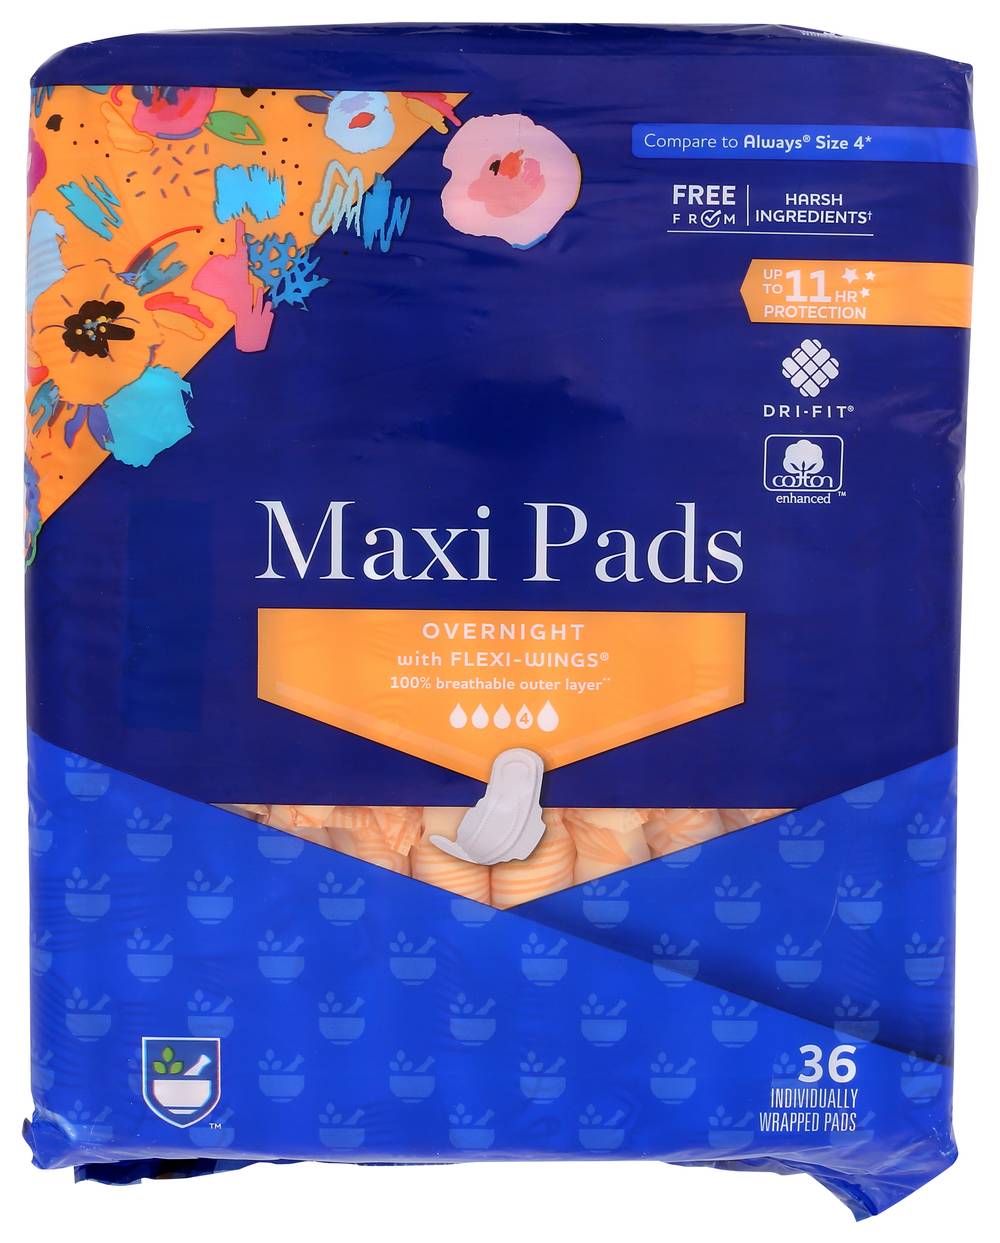 Rite Aid Overnight Maxi Pads with Flexi Wings (36 ct)